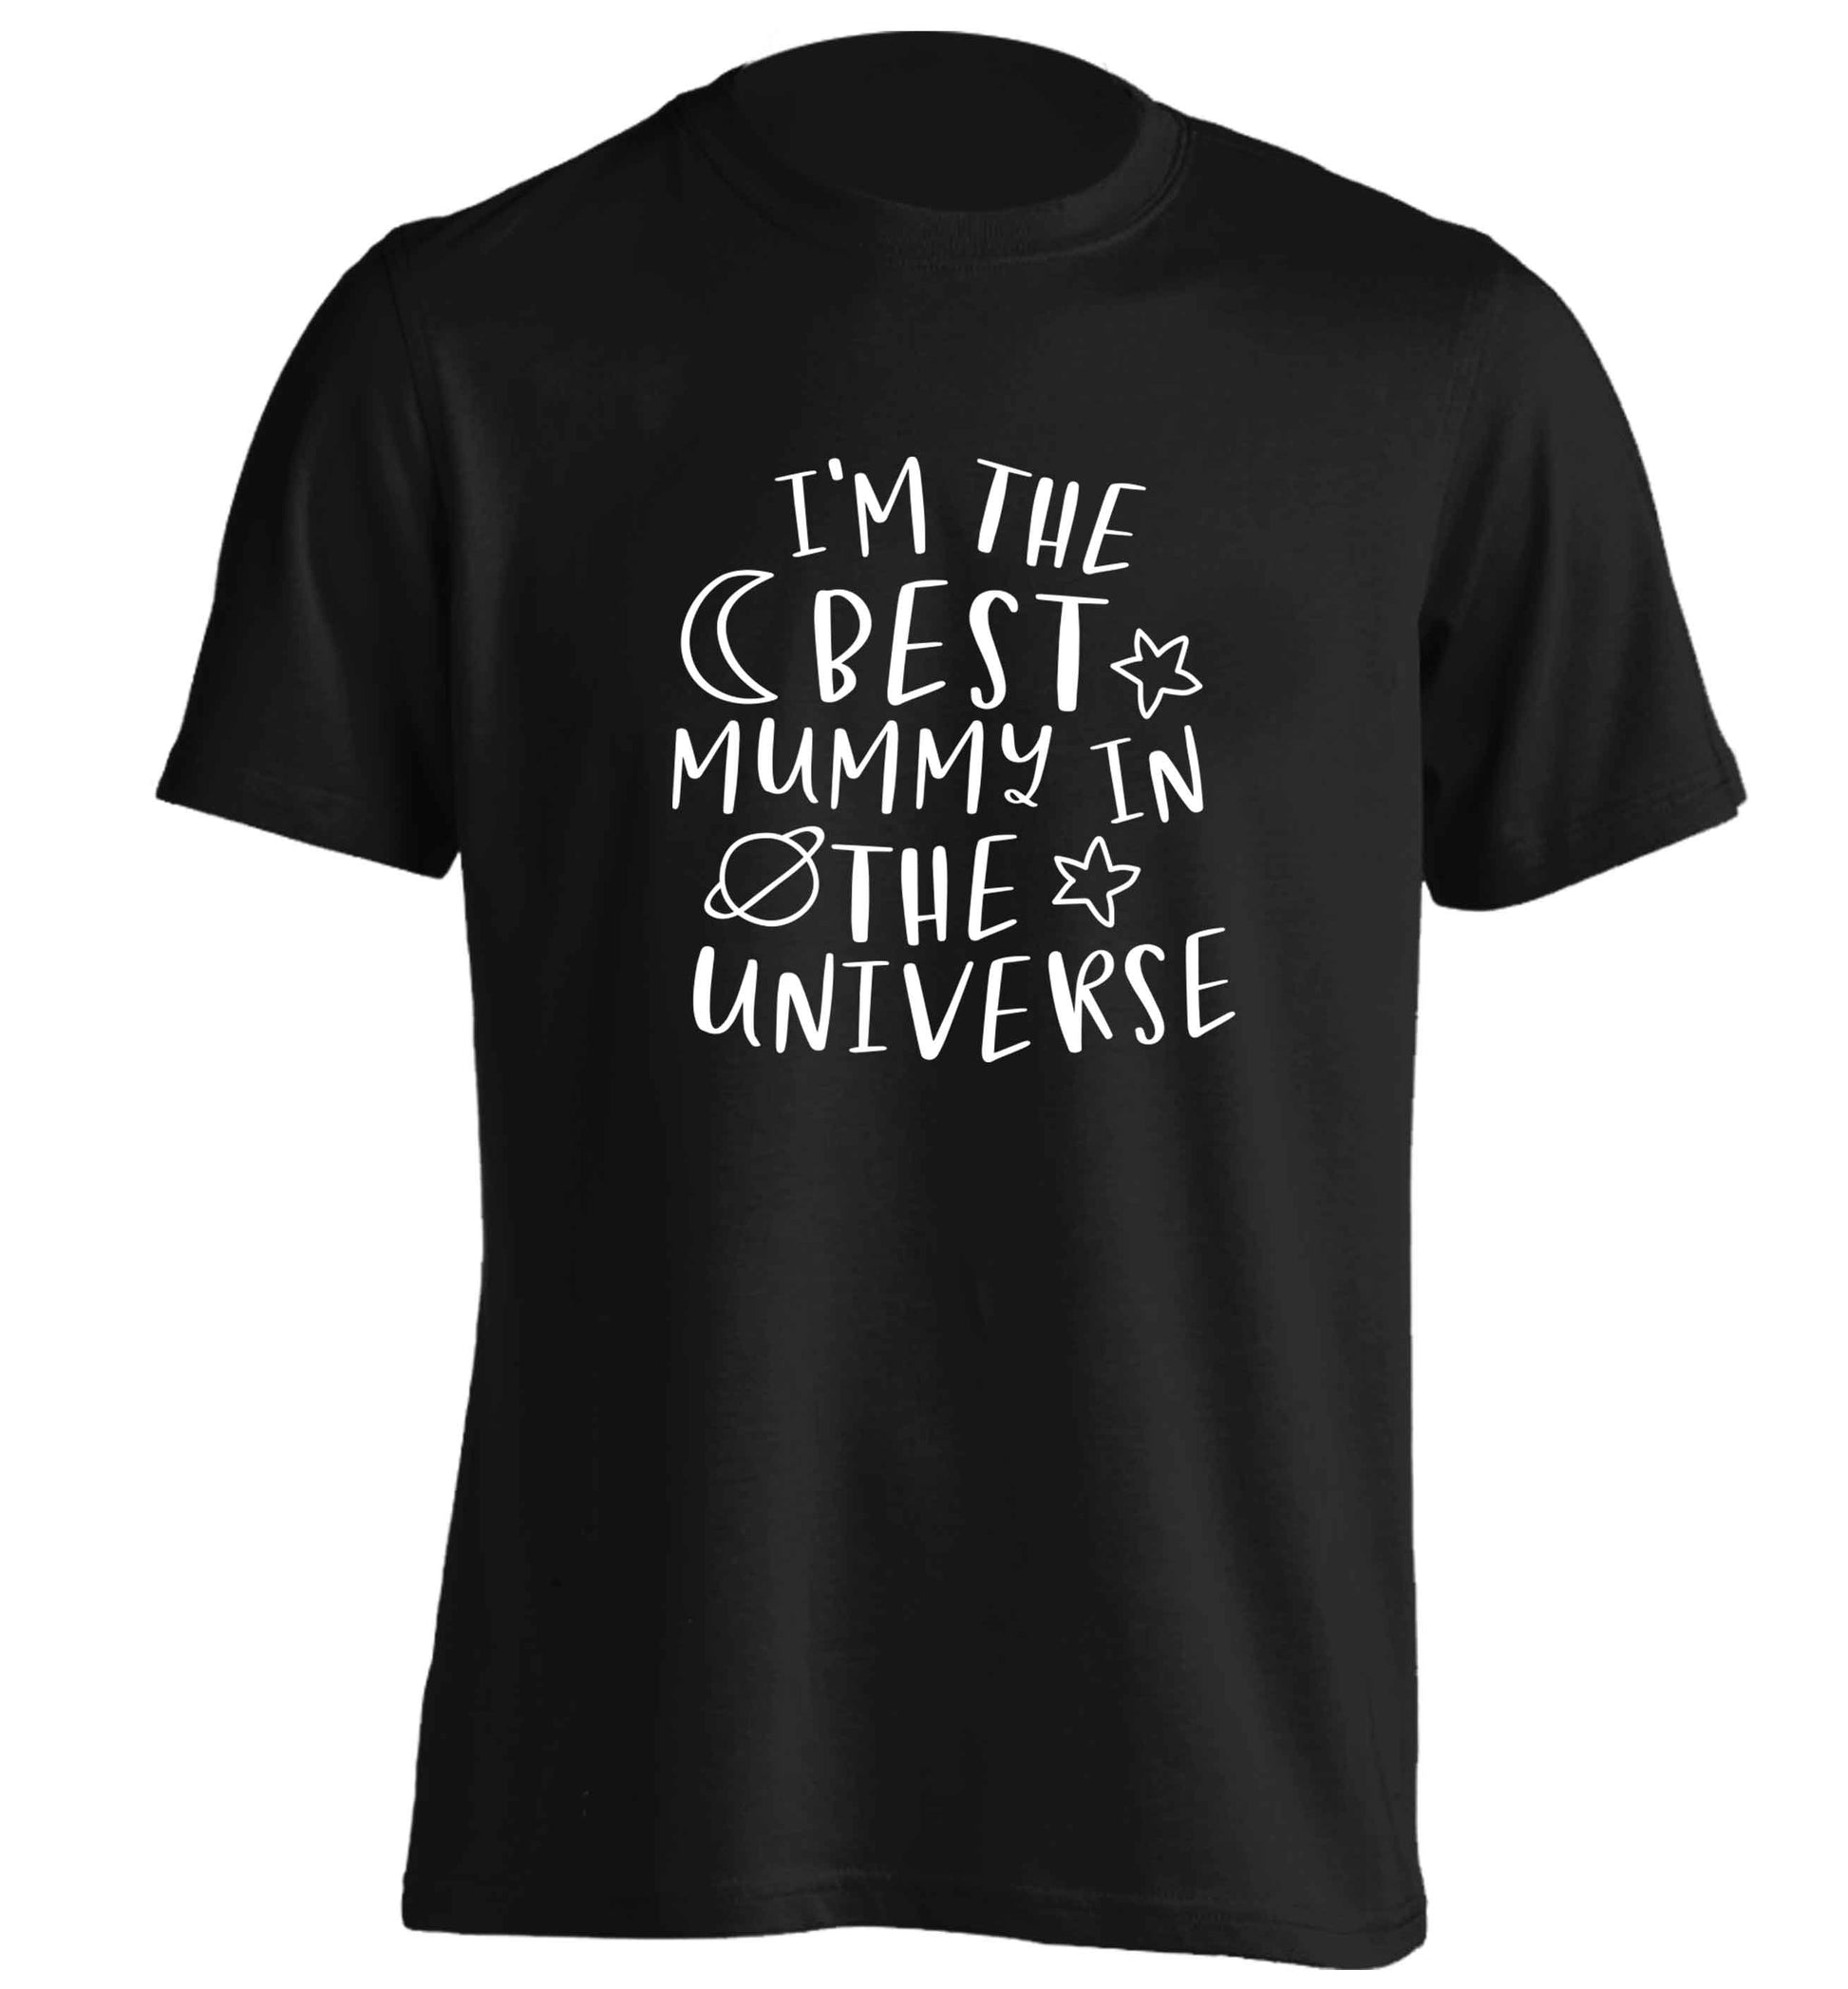 I'm the best mummy in the universe adults unisex black Tshirt 2XL